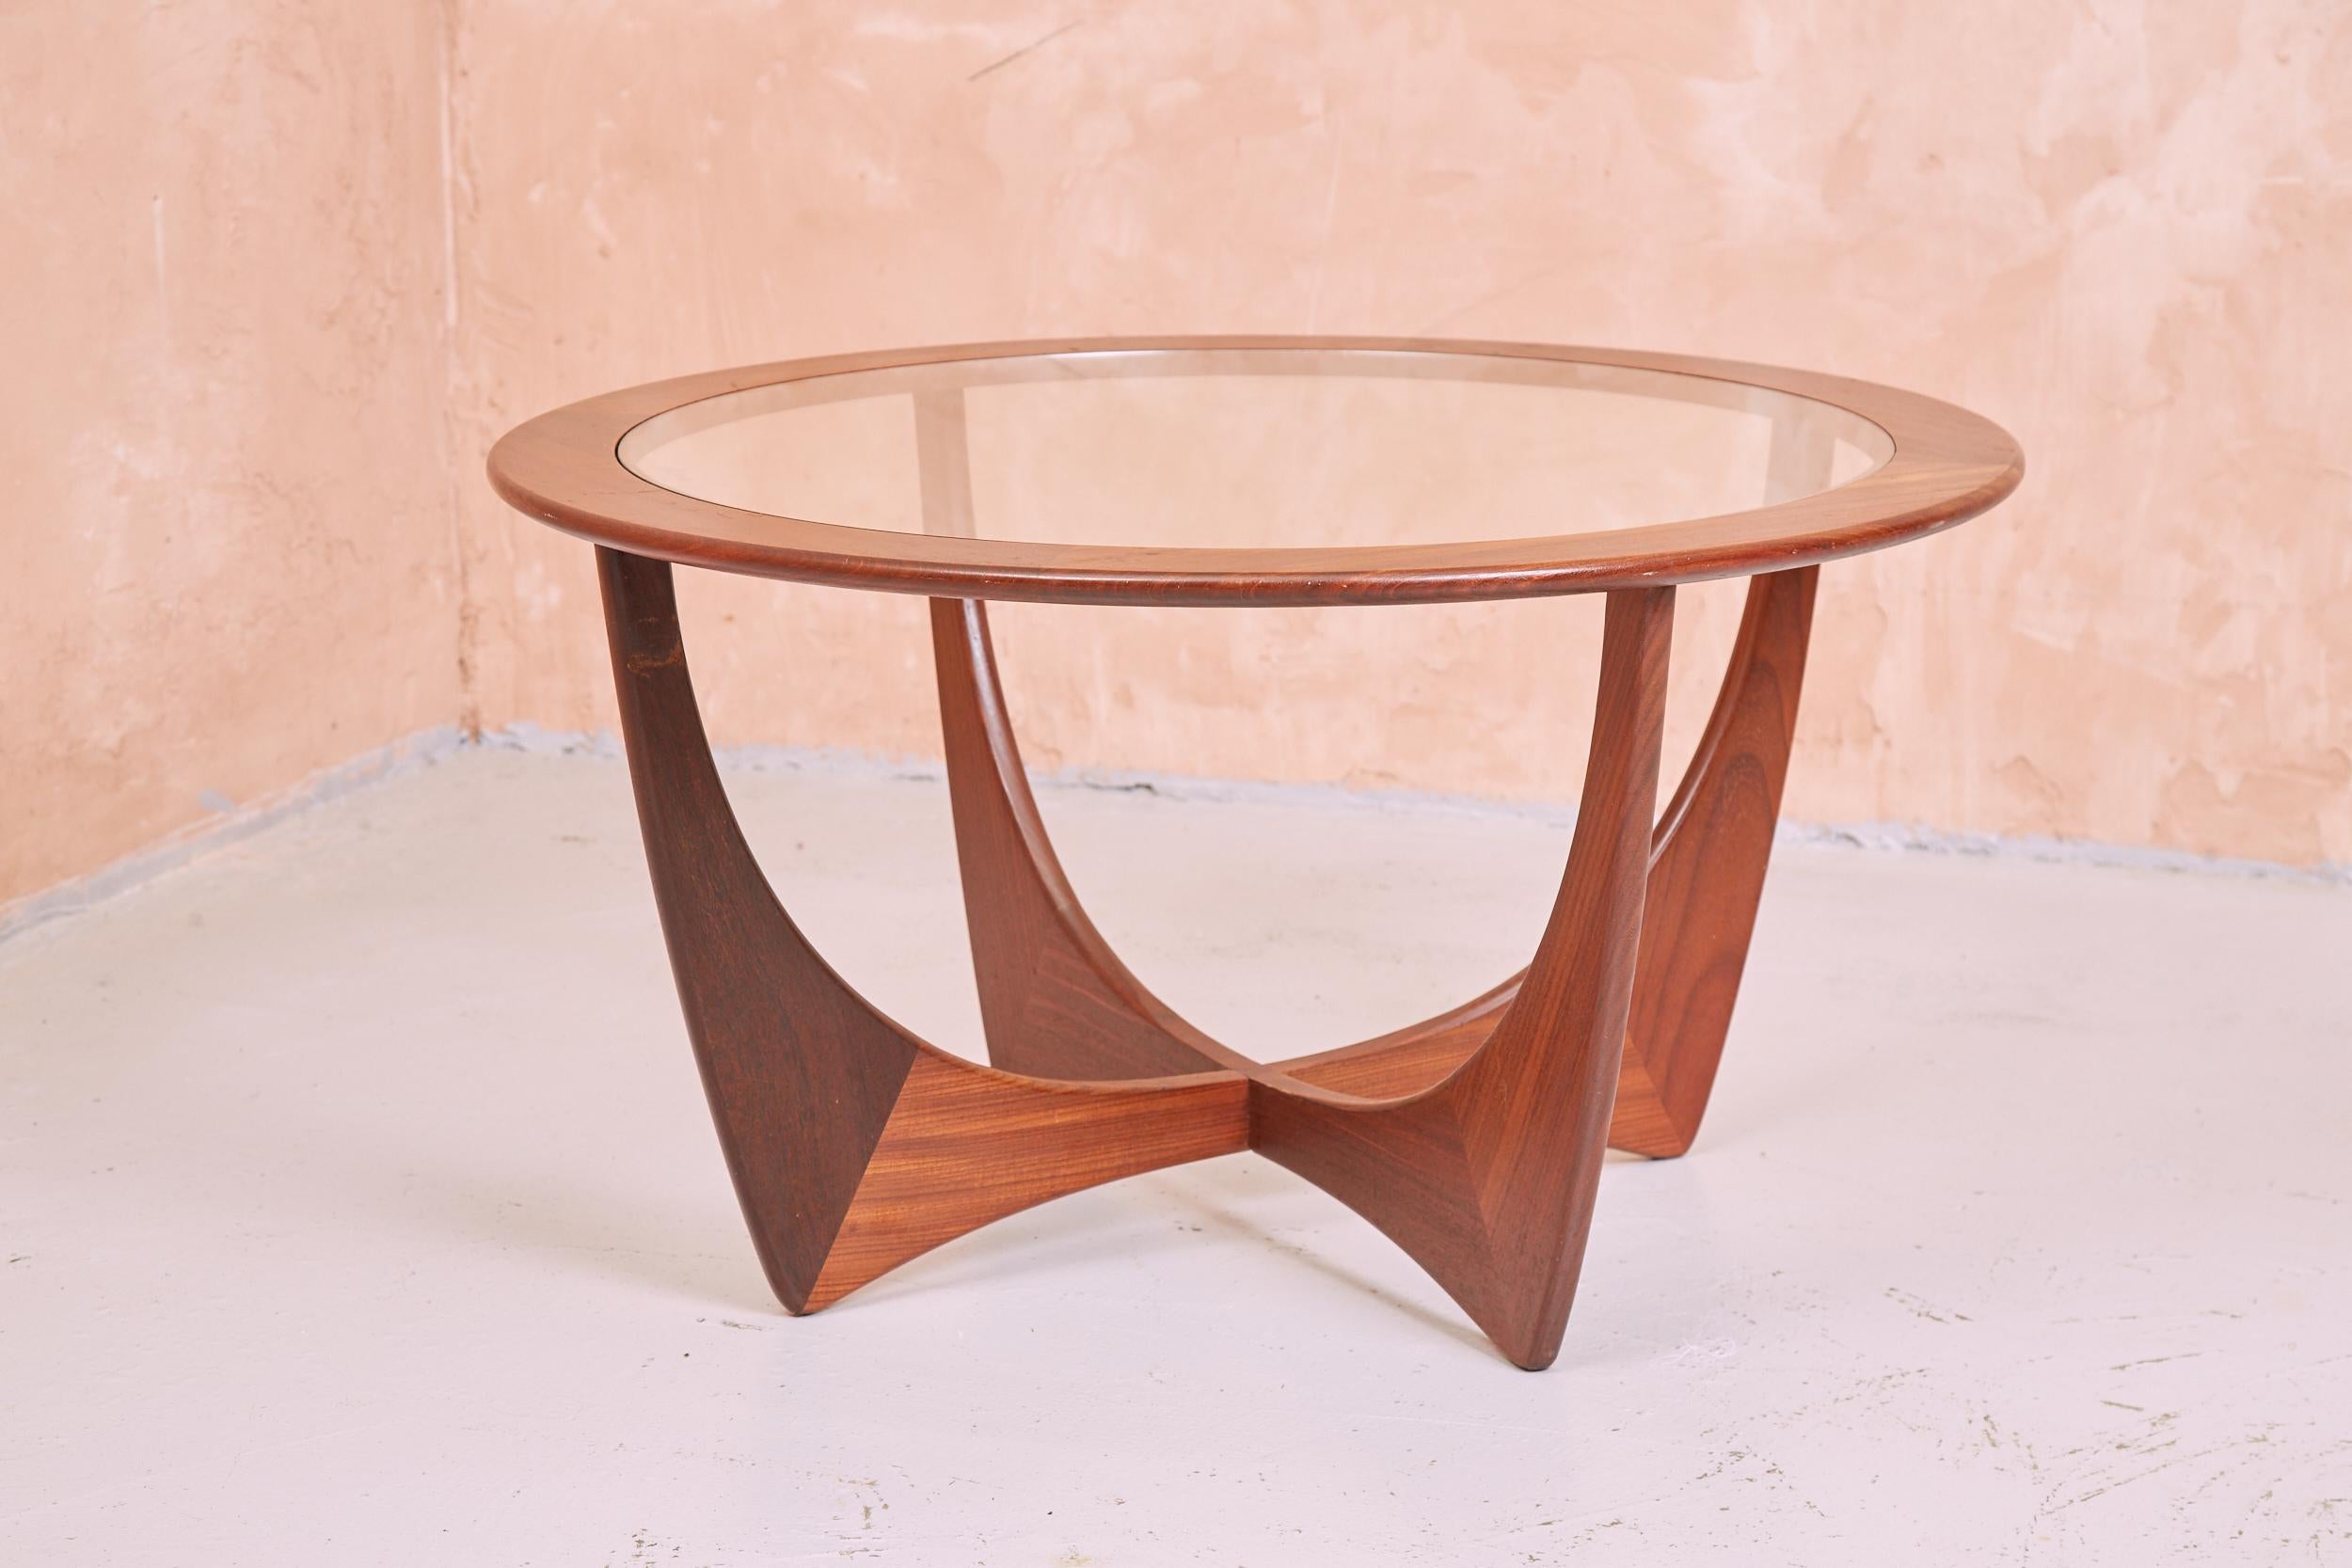 A vintage G Plan Astro table. A quintessential staple of a British mid century interior. A glass top inlaid in a circular teak frame, supported by the iconic teak astro legs.